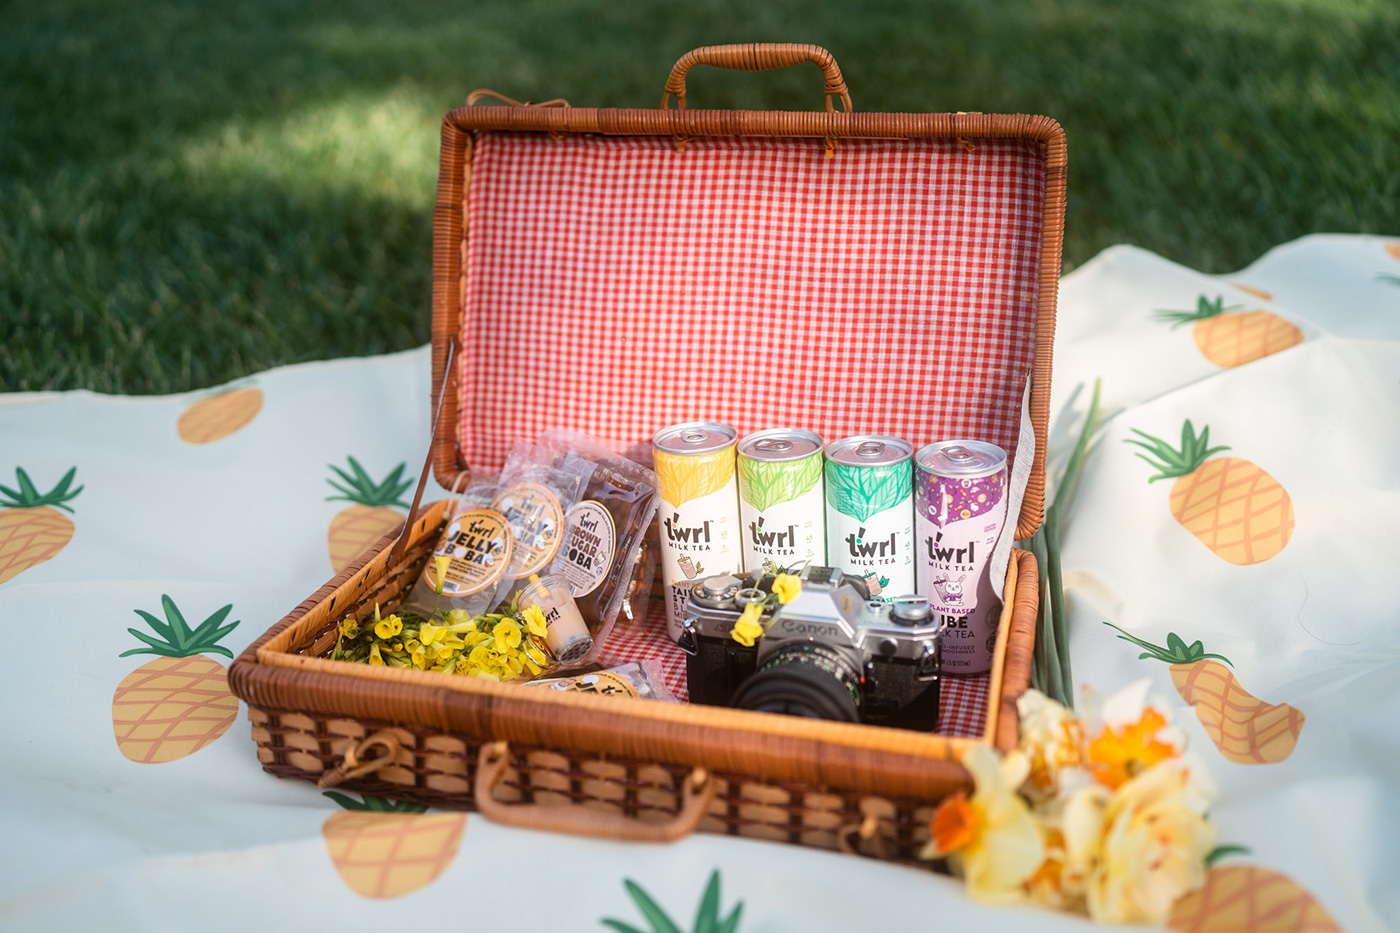 Twrl products in a picnic basket